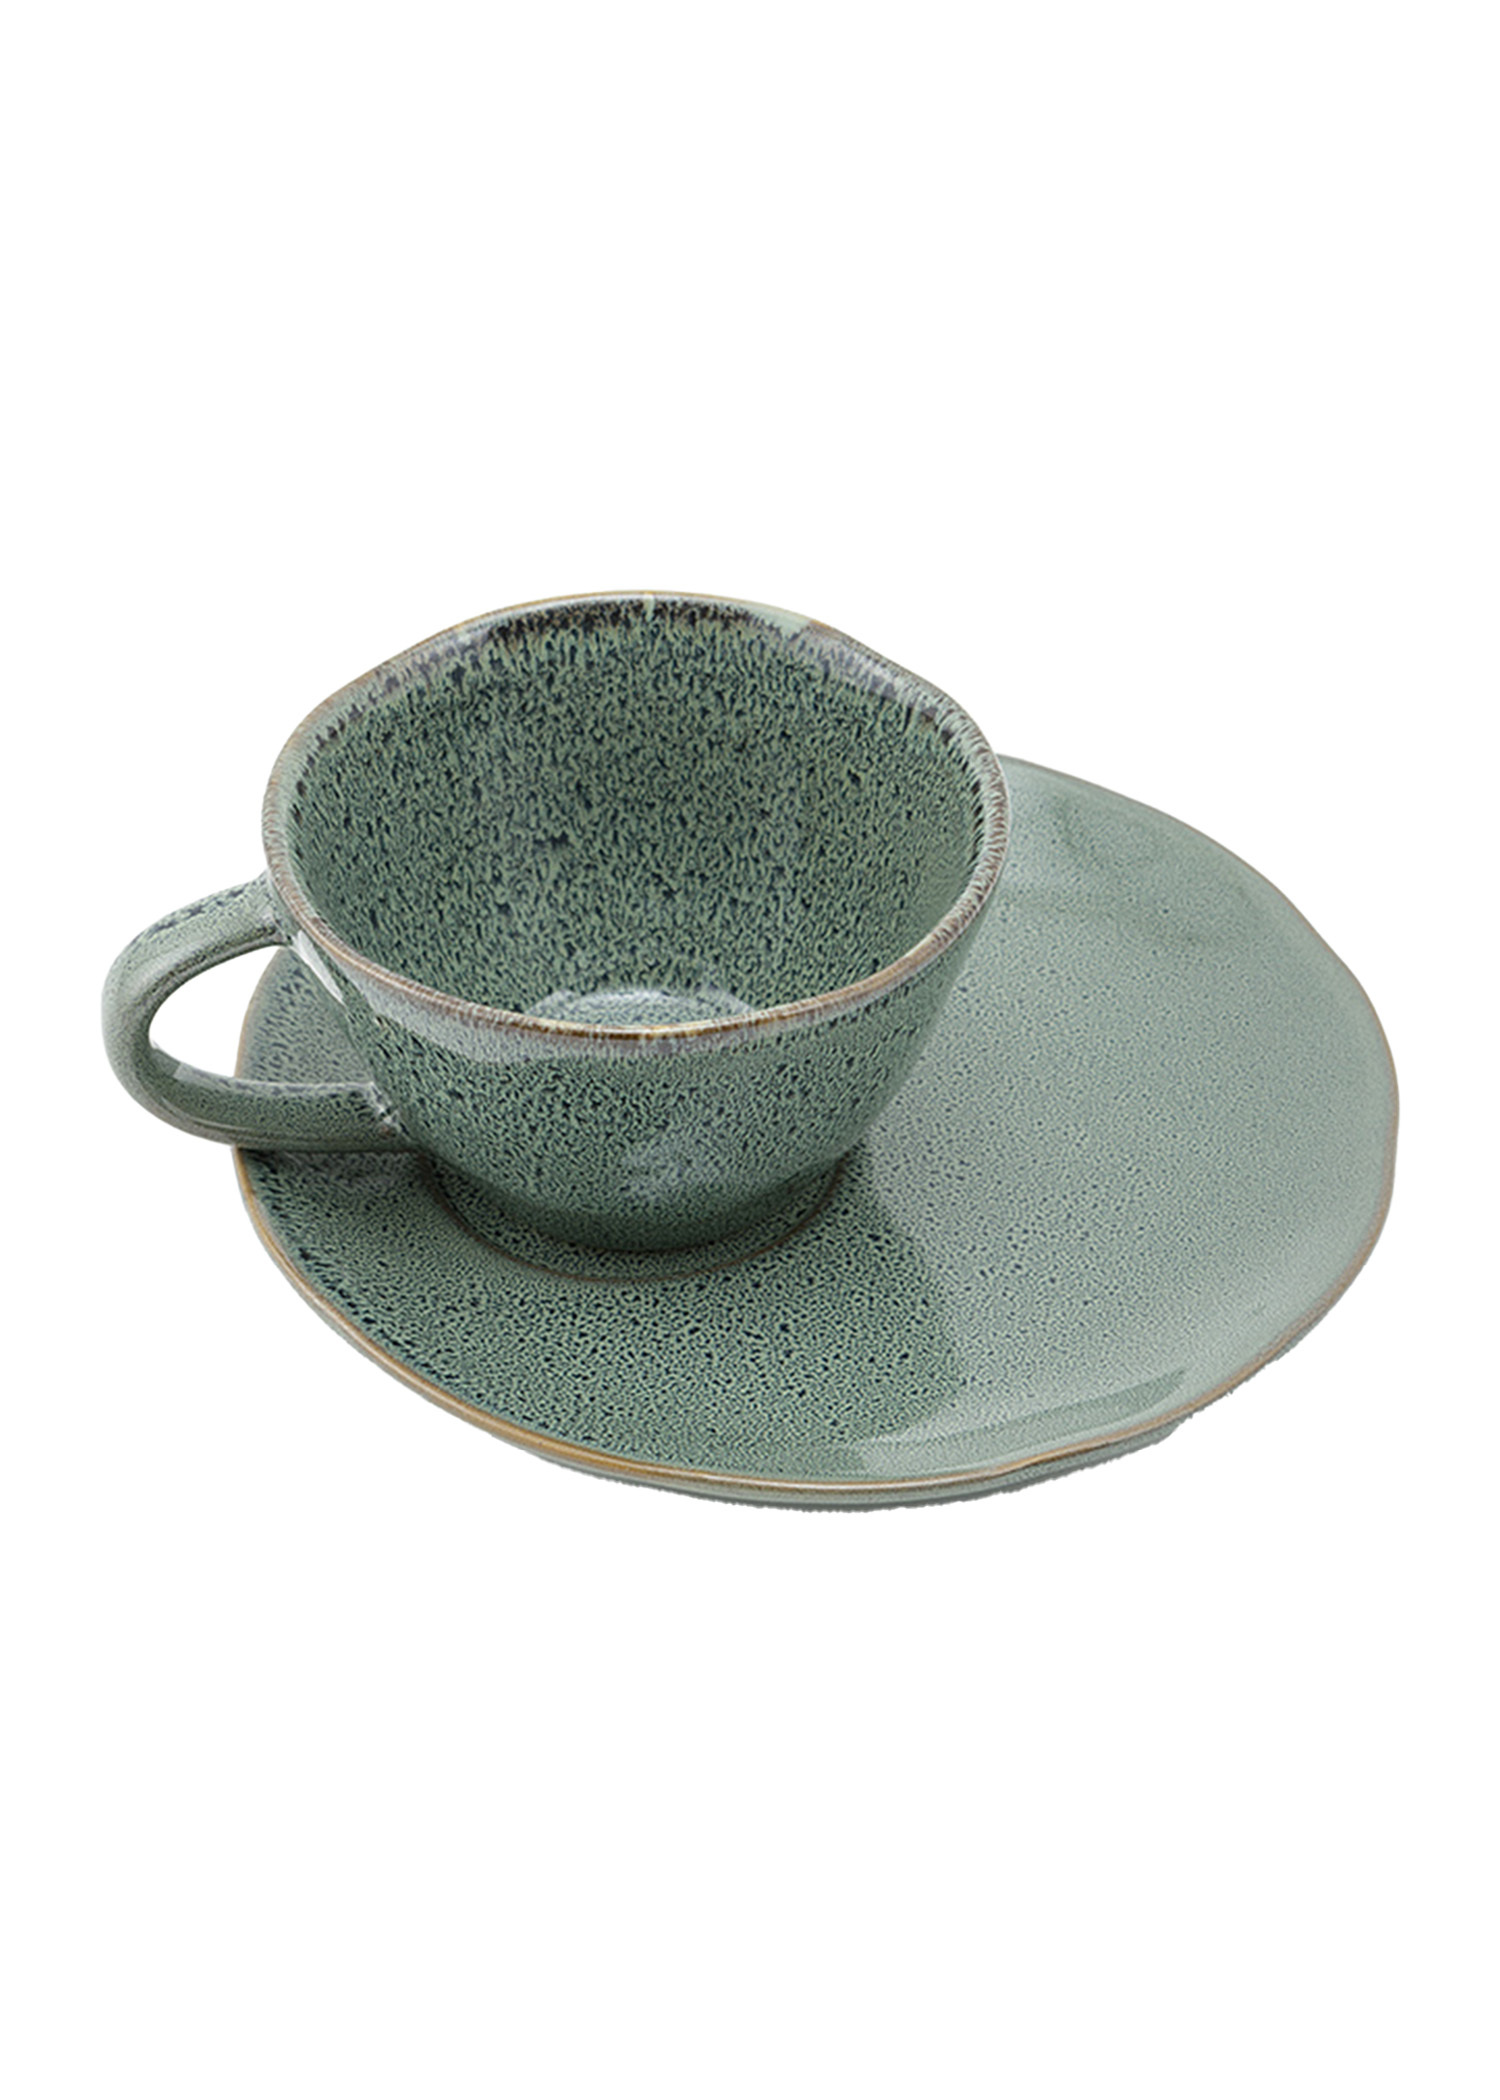 Stoneware cup and saucer Image 0